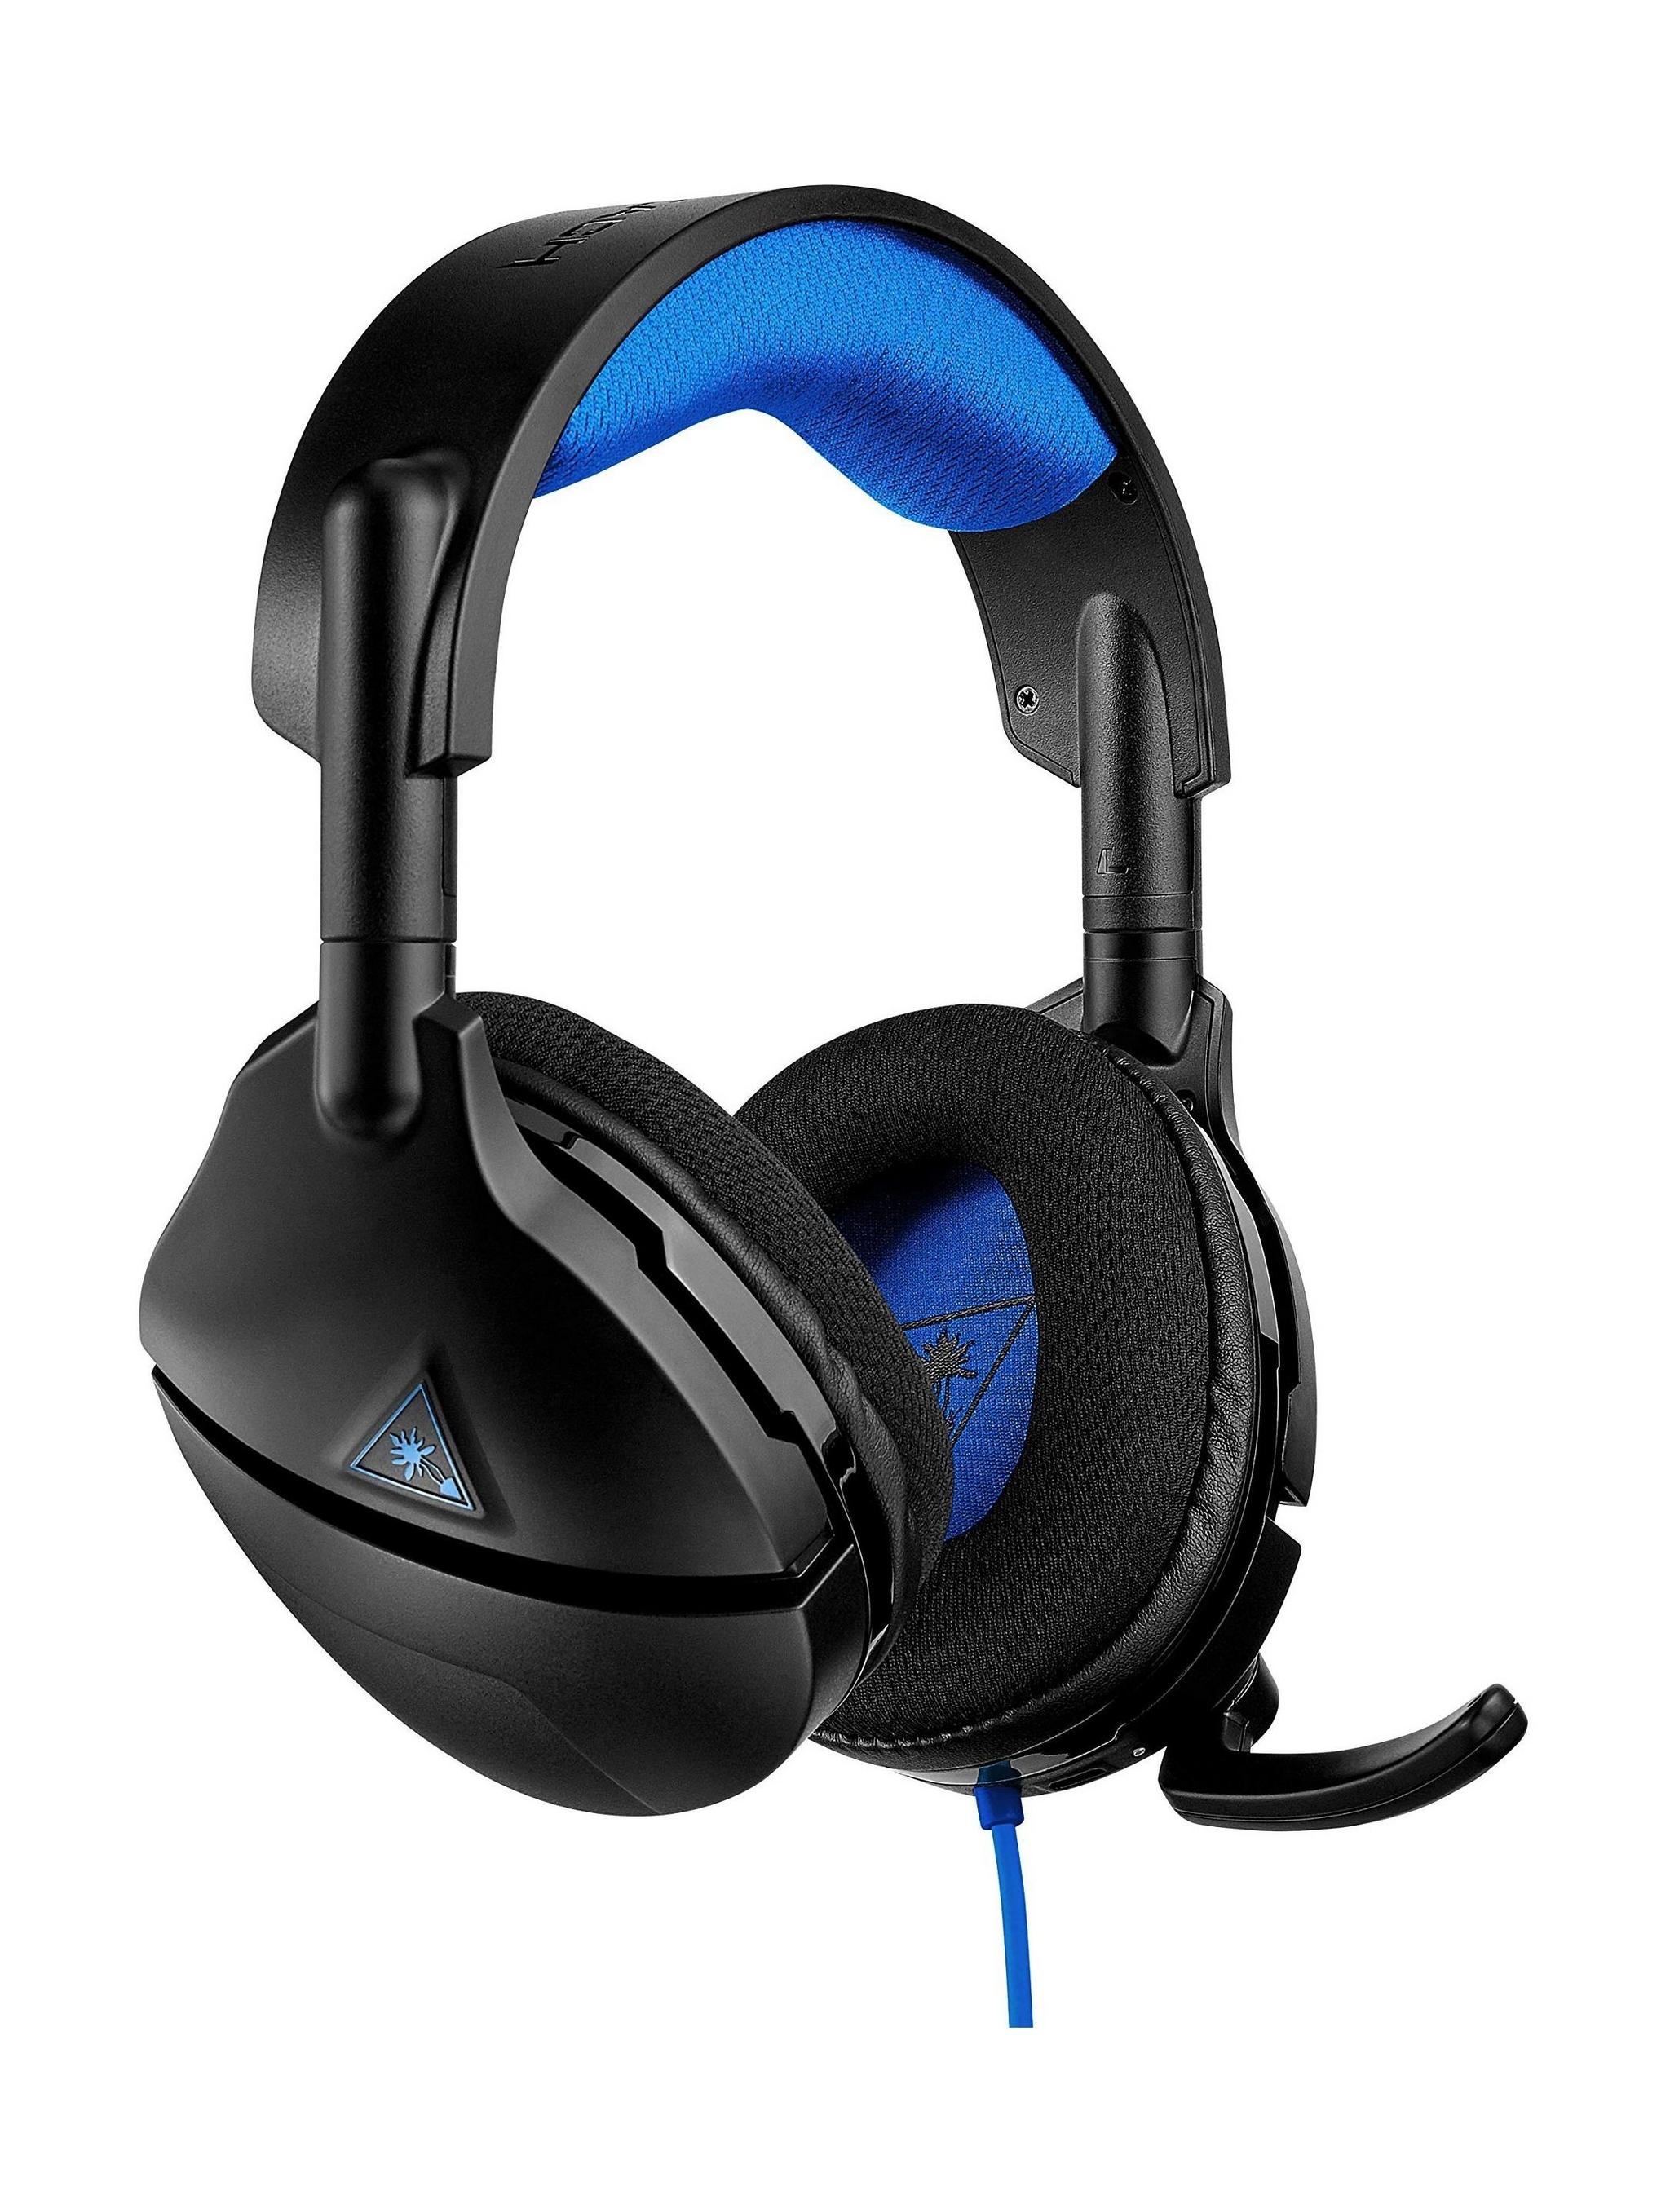 TurtleBeach Stealth  300 Gaming Headset for PlayStation 4